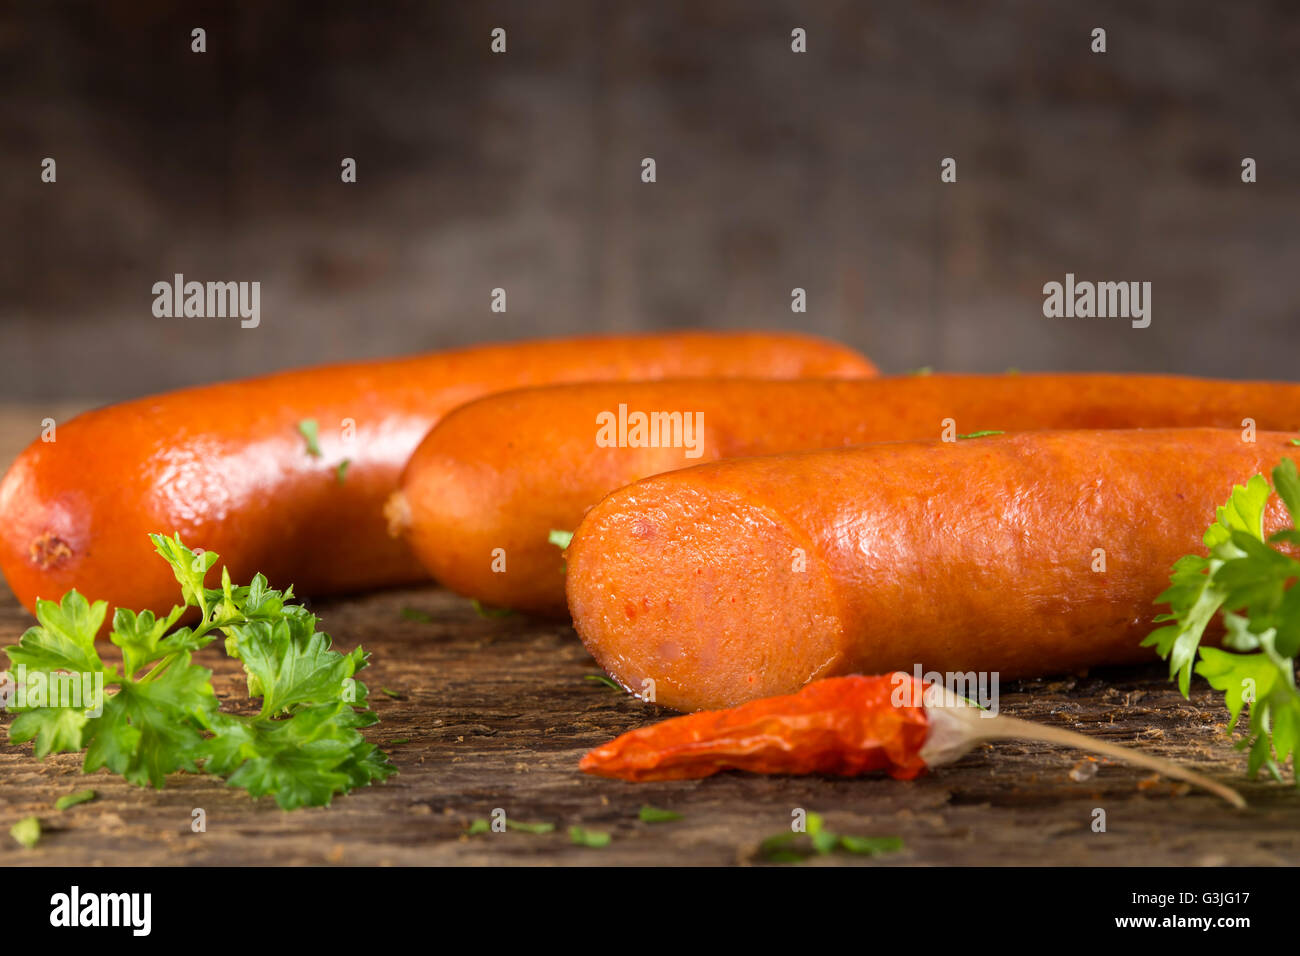 Paprika frankfurter sausage with herbs on wooden background Stock Photo